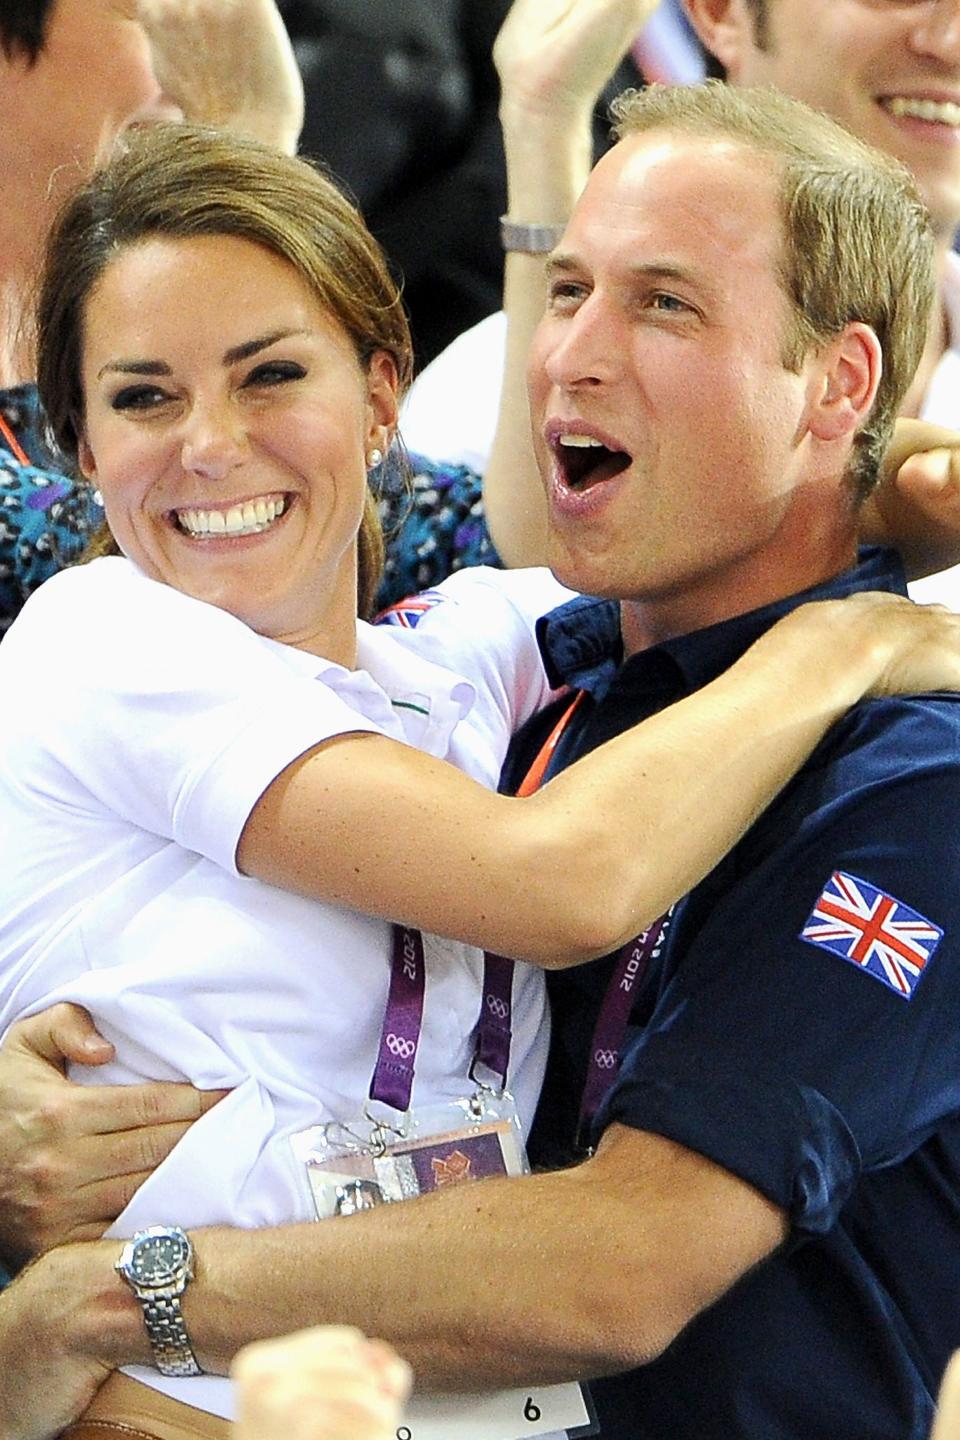 Kate and William celebrate as Britain wins a cycling race during the Olympic Games in 2012 (Getty Images)